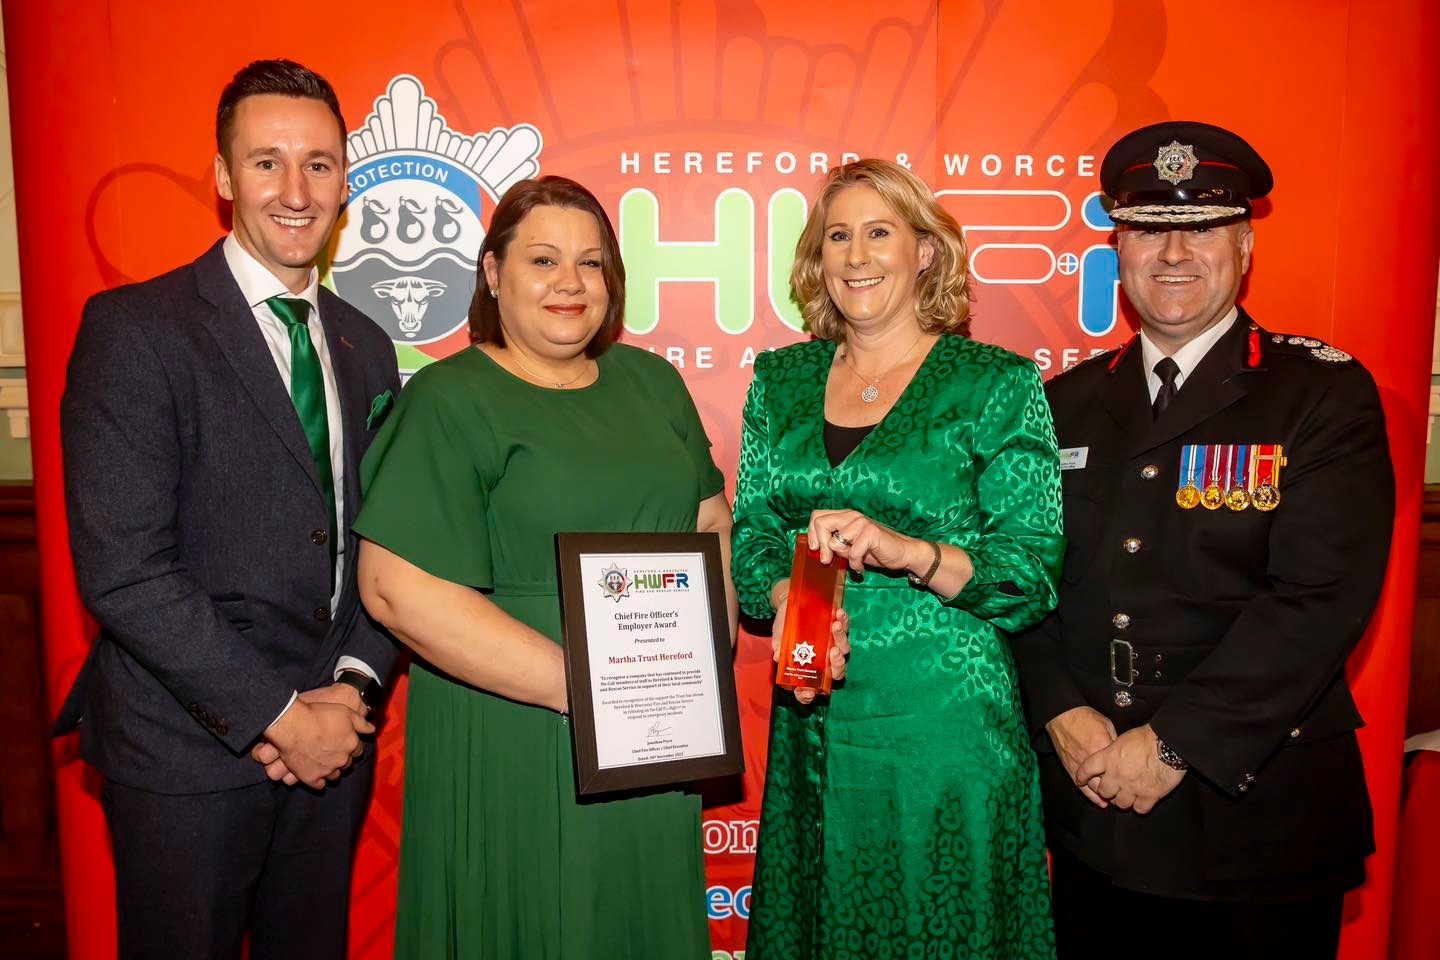 Hereford charity wins Chief Fire Officer’s award